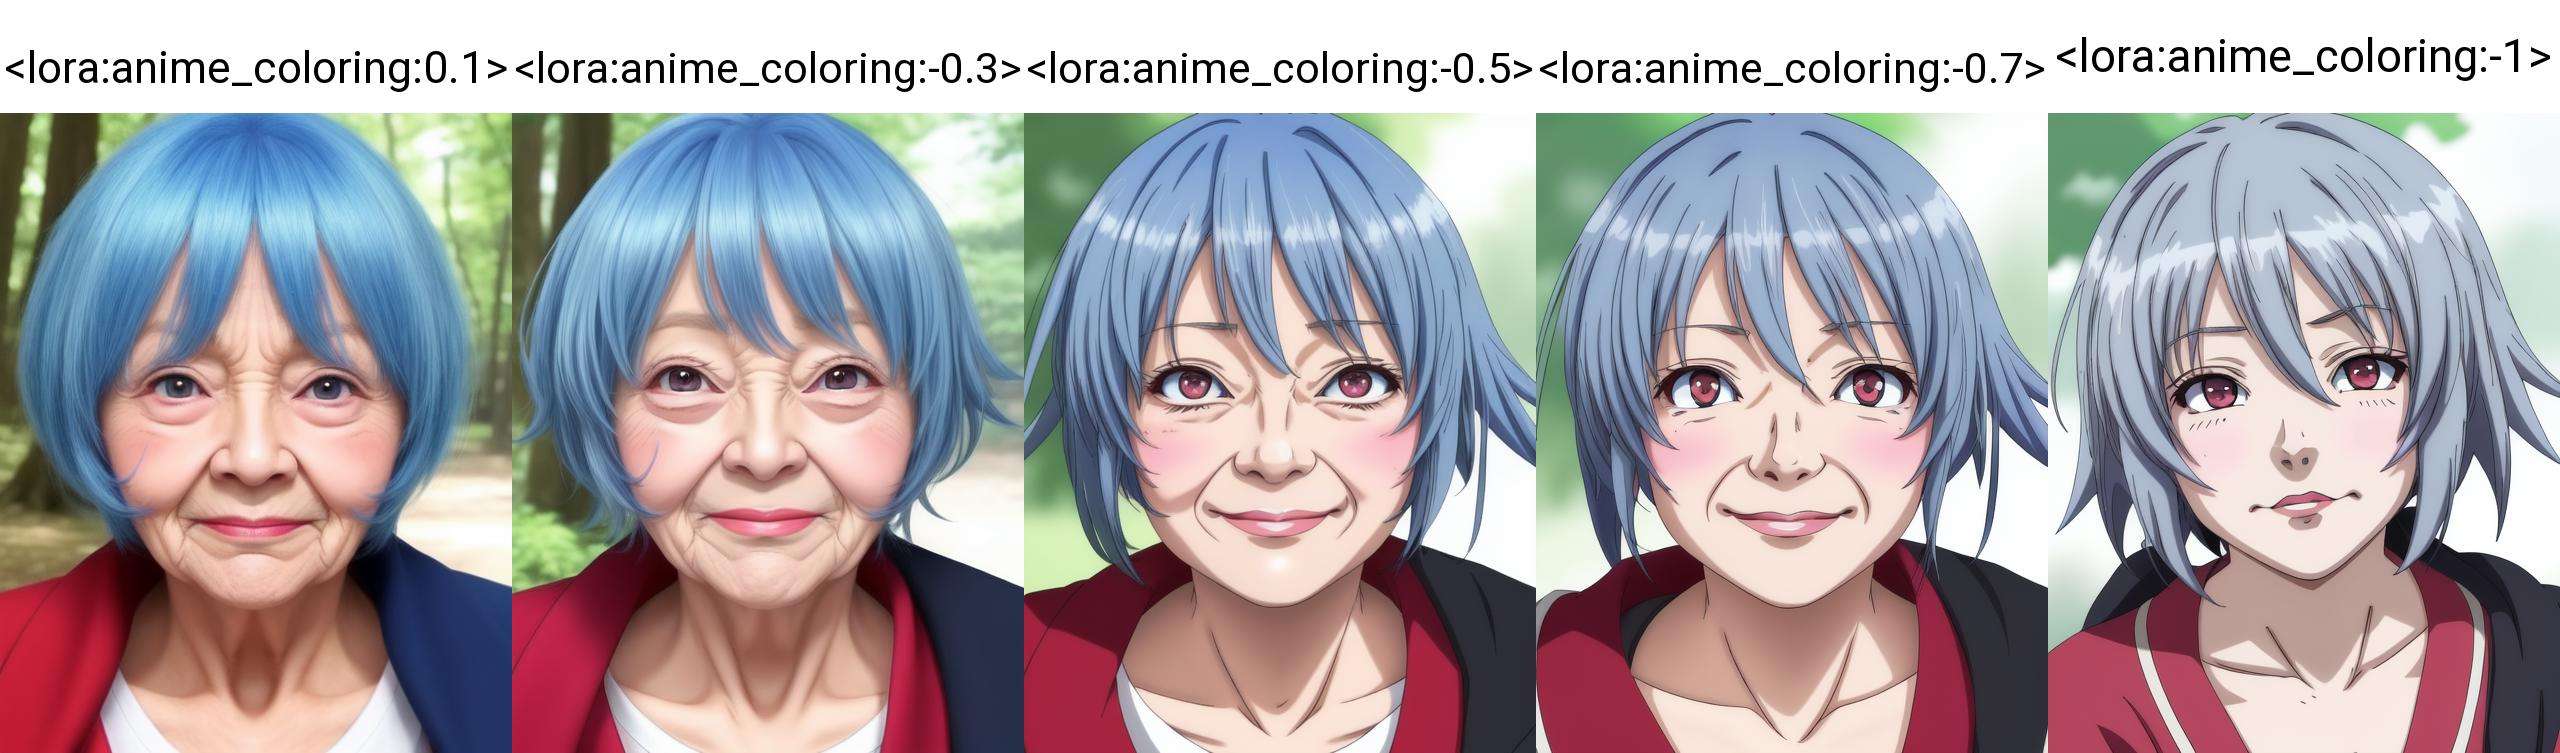 <lora:anime_coloring:0.1>, 1woman, 96 years old, nasolabial folds, Wrinkle, (anime_coloring:1.1), face focus, blue hair, red eyes, long sleeves, forest